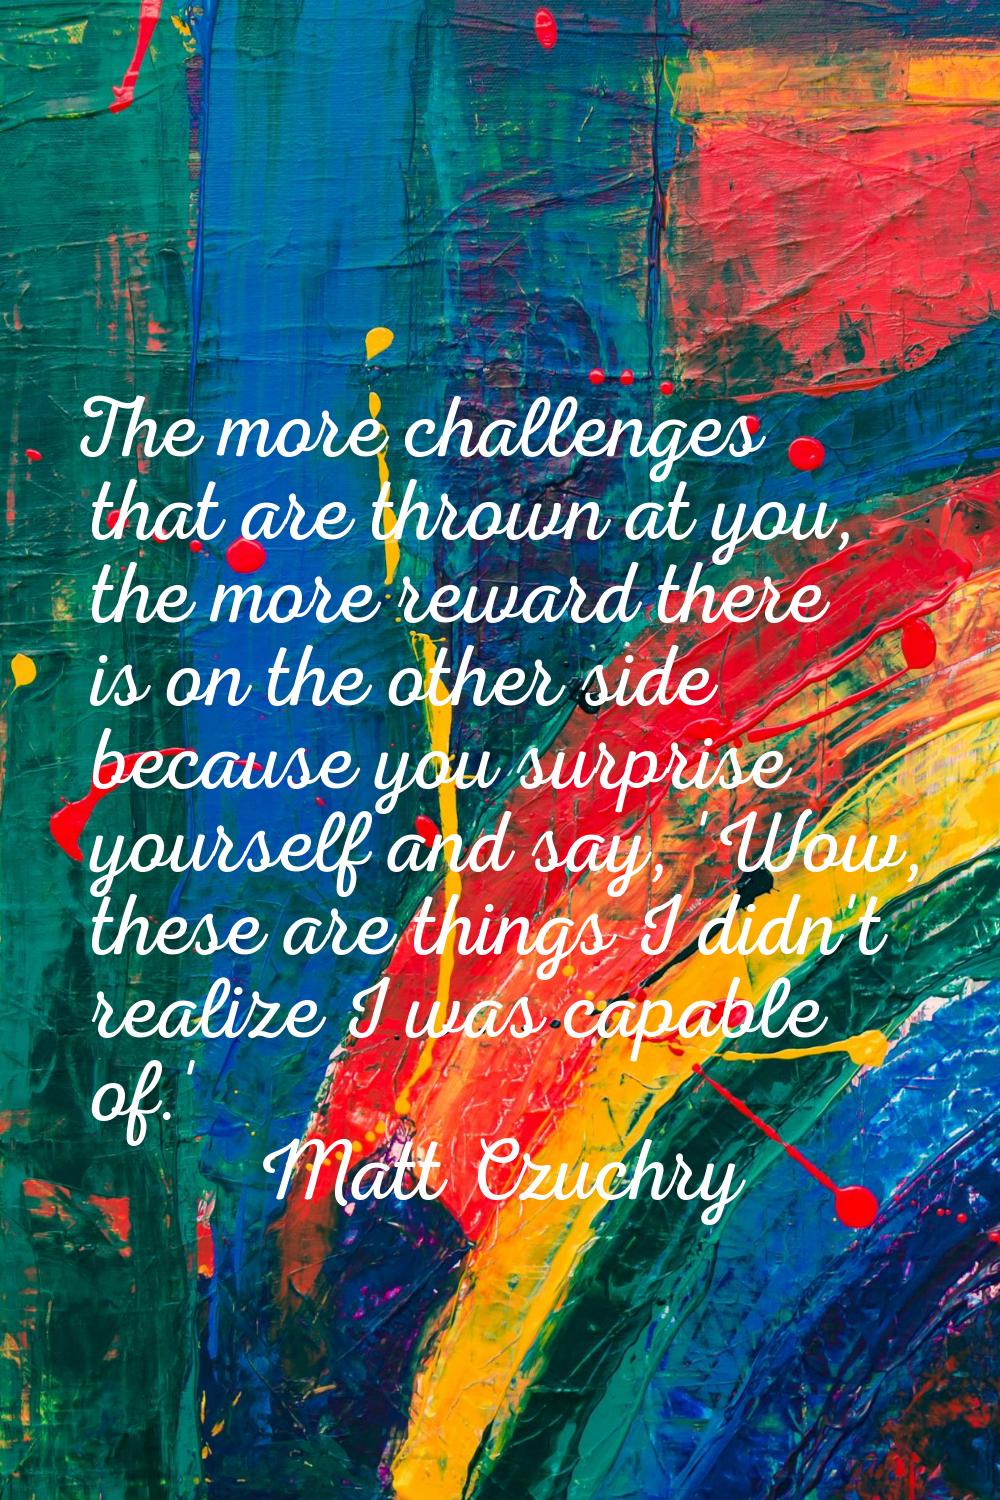 The more challenges that are thrown at you, the more reward there is on the other side because you 